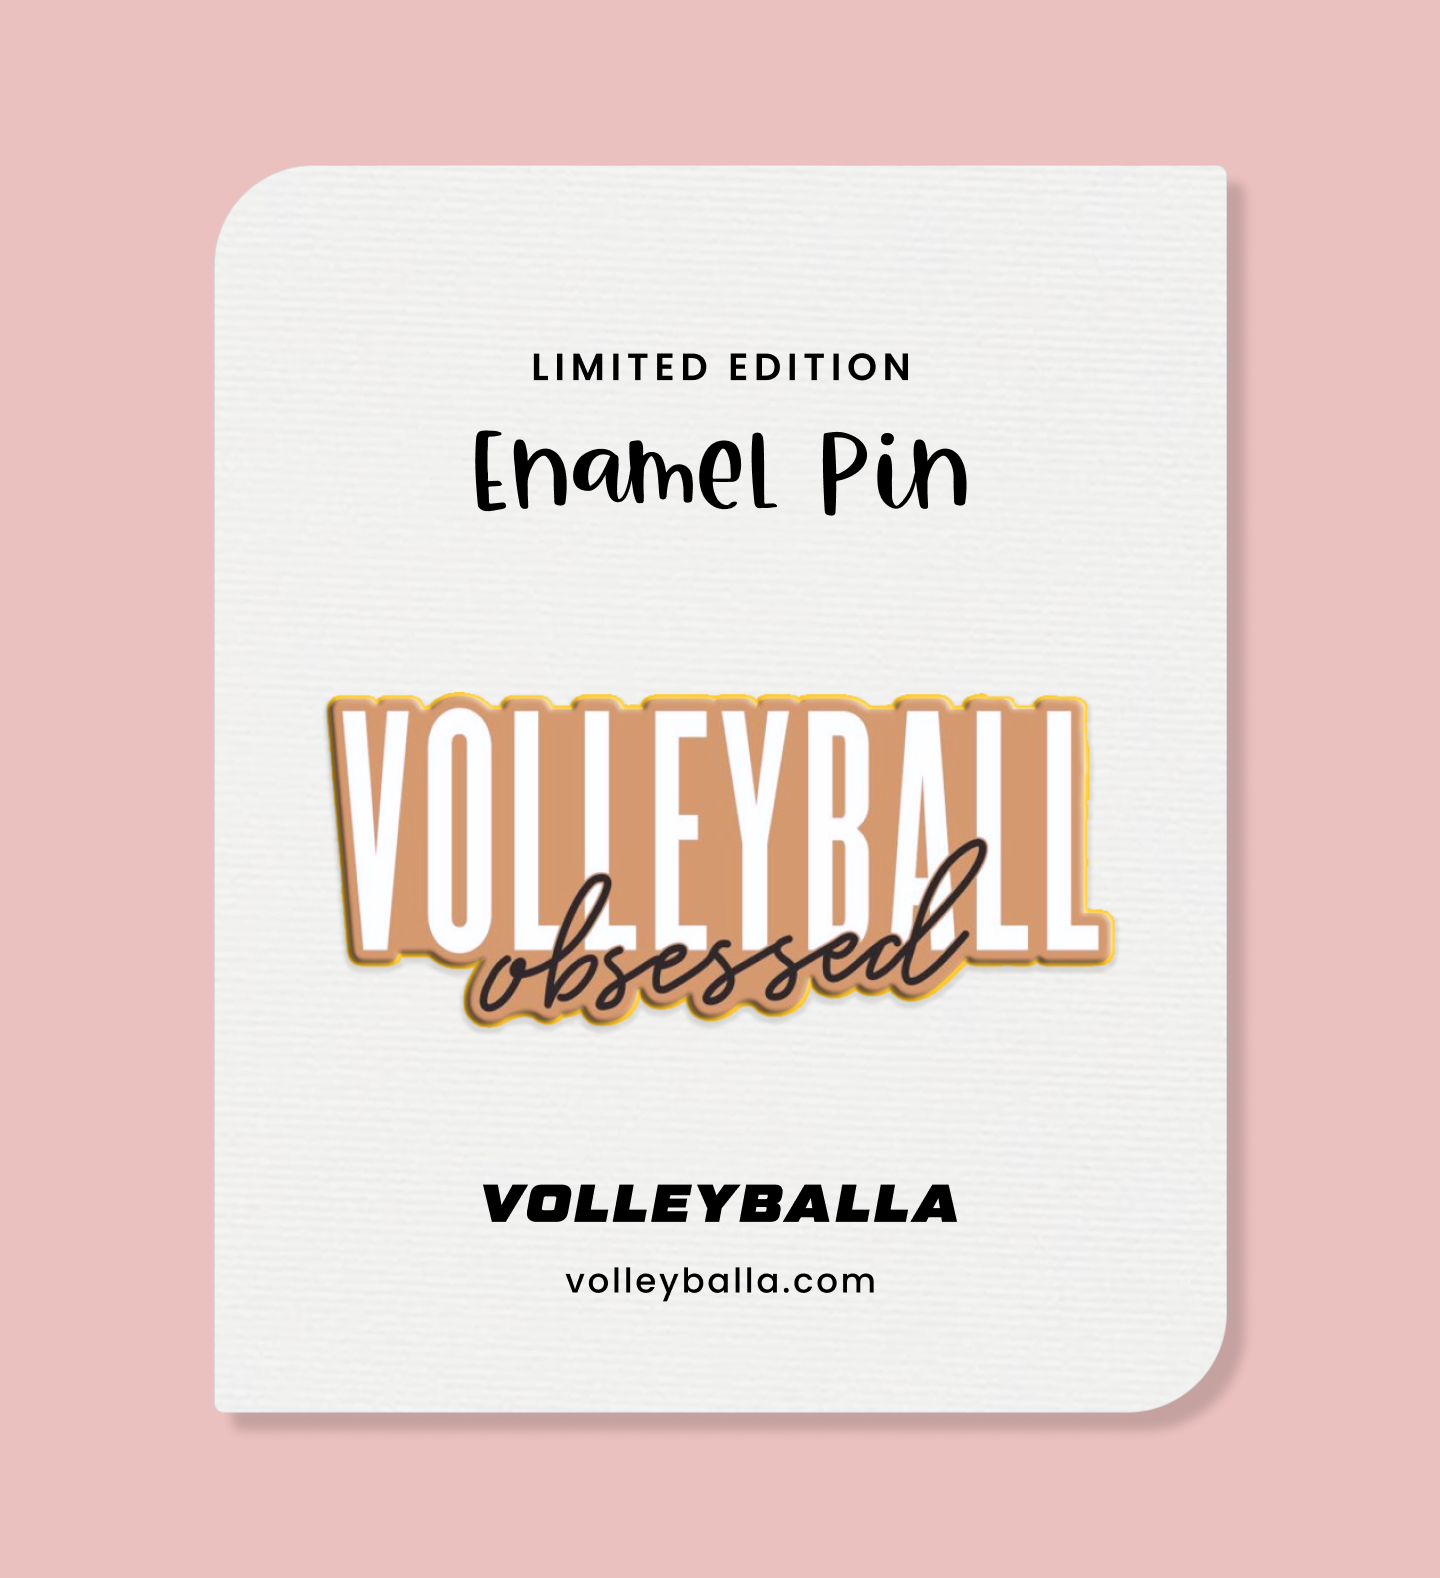 Volleyball Obsessed Volleyball Enamel Pin